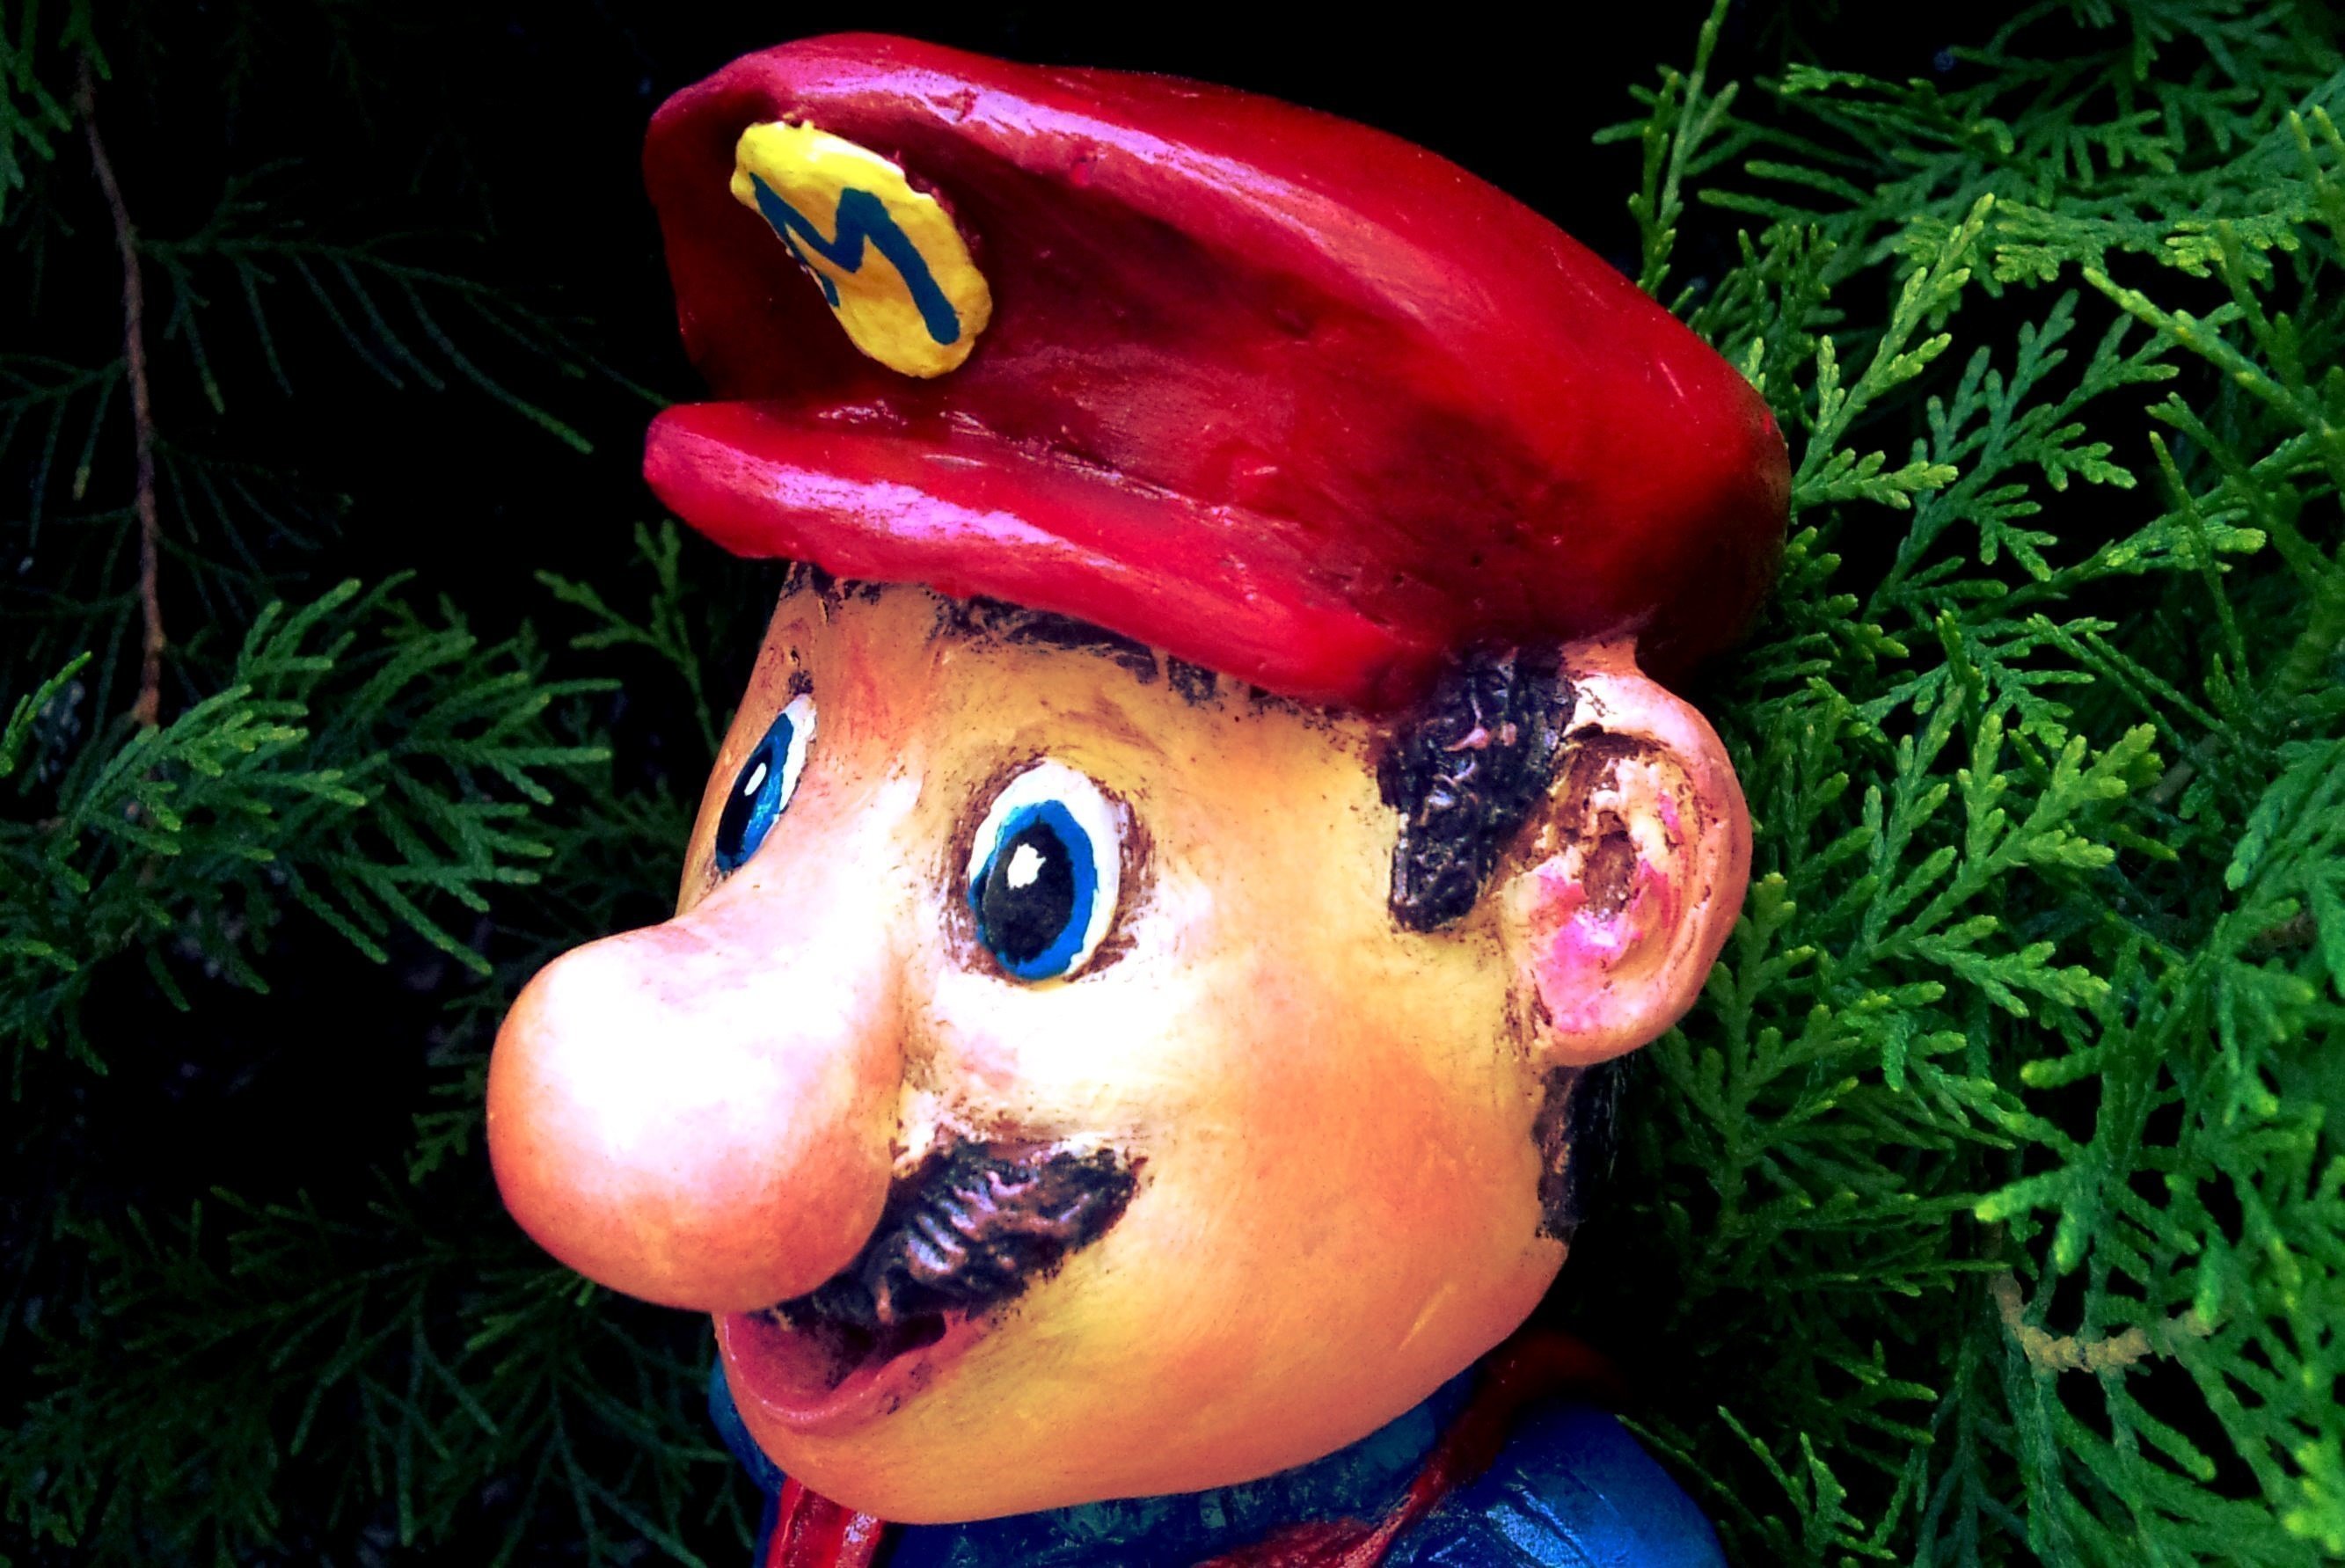 Angel Piangelo Papangelo; SUPER MARIO FANTASY WORLD I, 2016, Original Sculpture Mixed, 17 x 35 cm. Artwork description: 241 SCULPTURE - Ceramic Synthetic Porcelain Gc Fuji Rock , with black Rubber soft protective Base - HAND PAINTED with acrylic colors - Theme inspired from various itemscharacters of Super Mario games, but also from the Sonic the Black Knight video game and the Zeldas Link character - original Angel P.  Artwork - signed ...